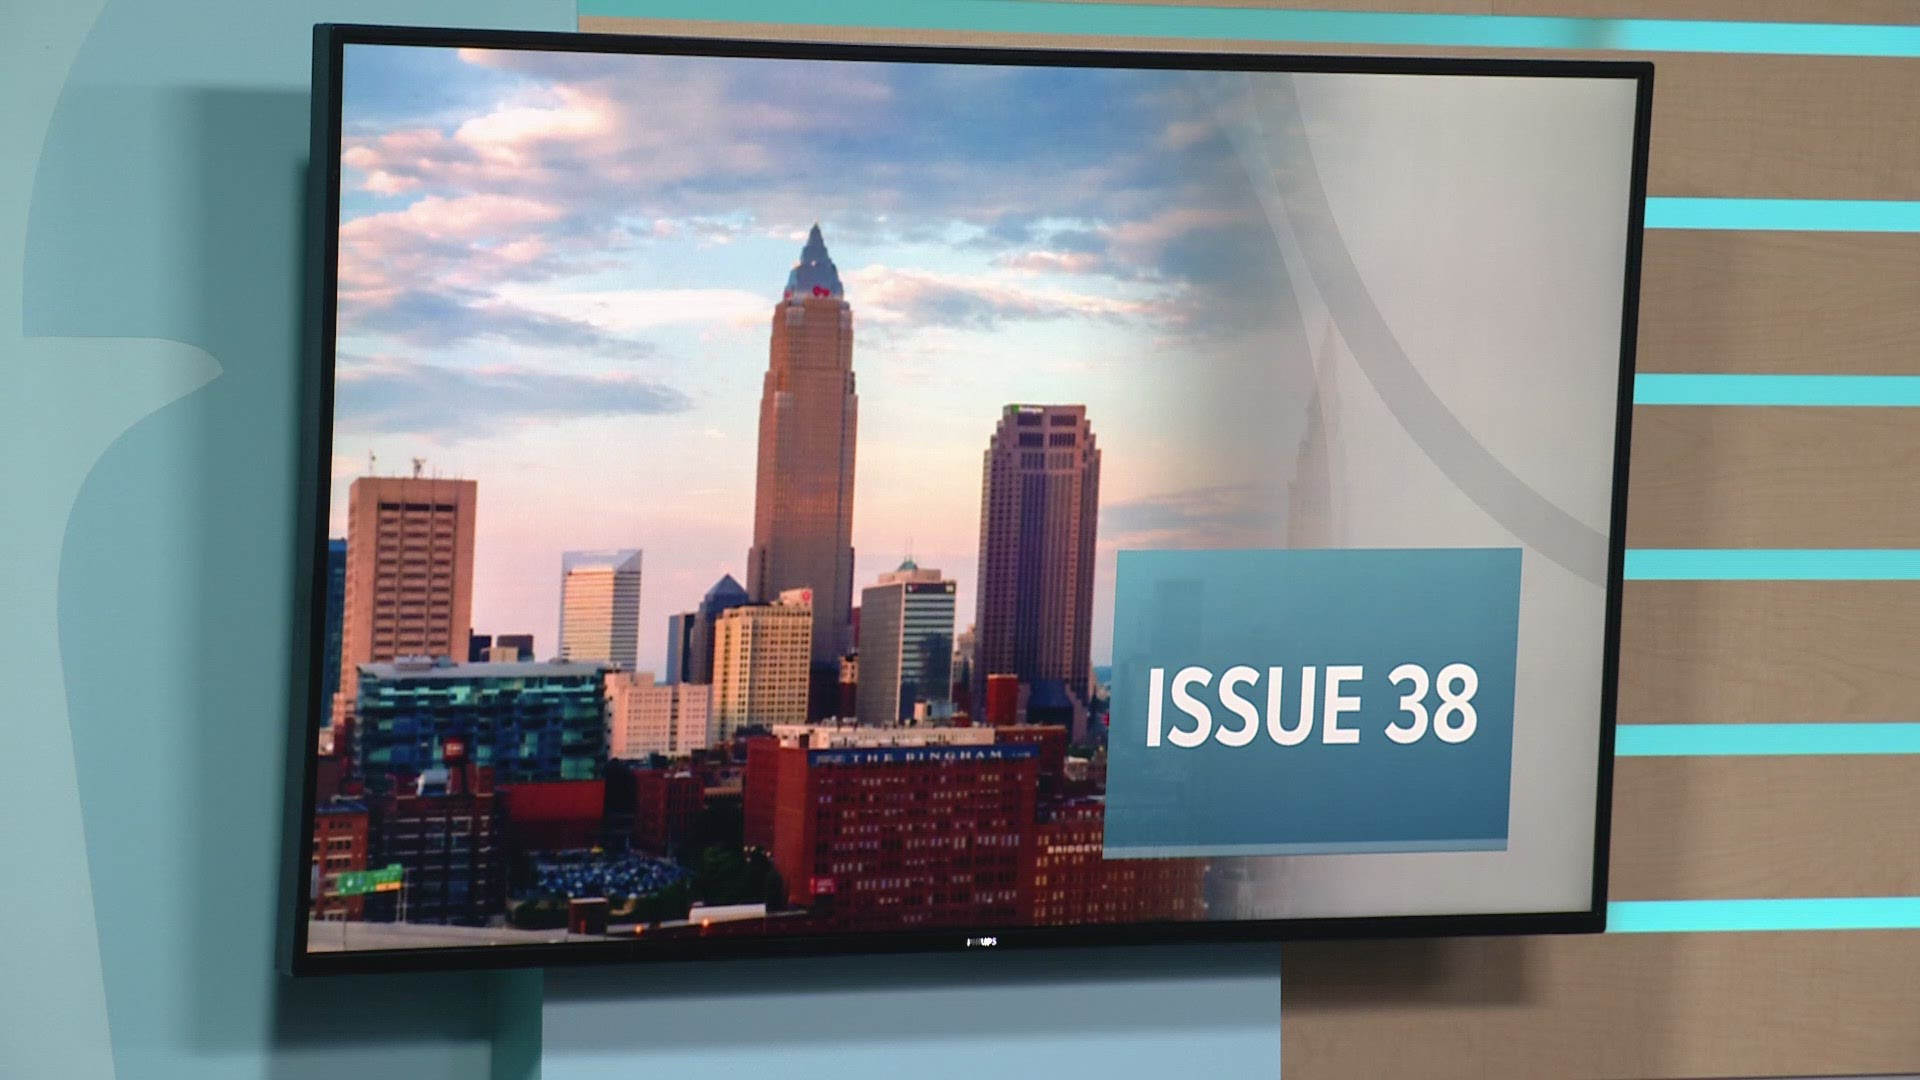 Signal Cleveland's Mark Naymik joins 3News at 5 to break down Issue 38 and what it means for Cleveland residents.